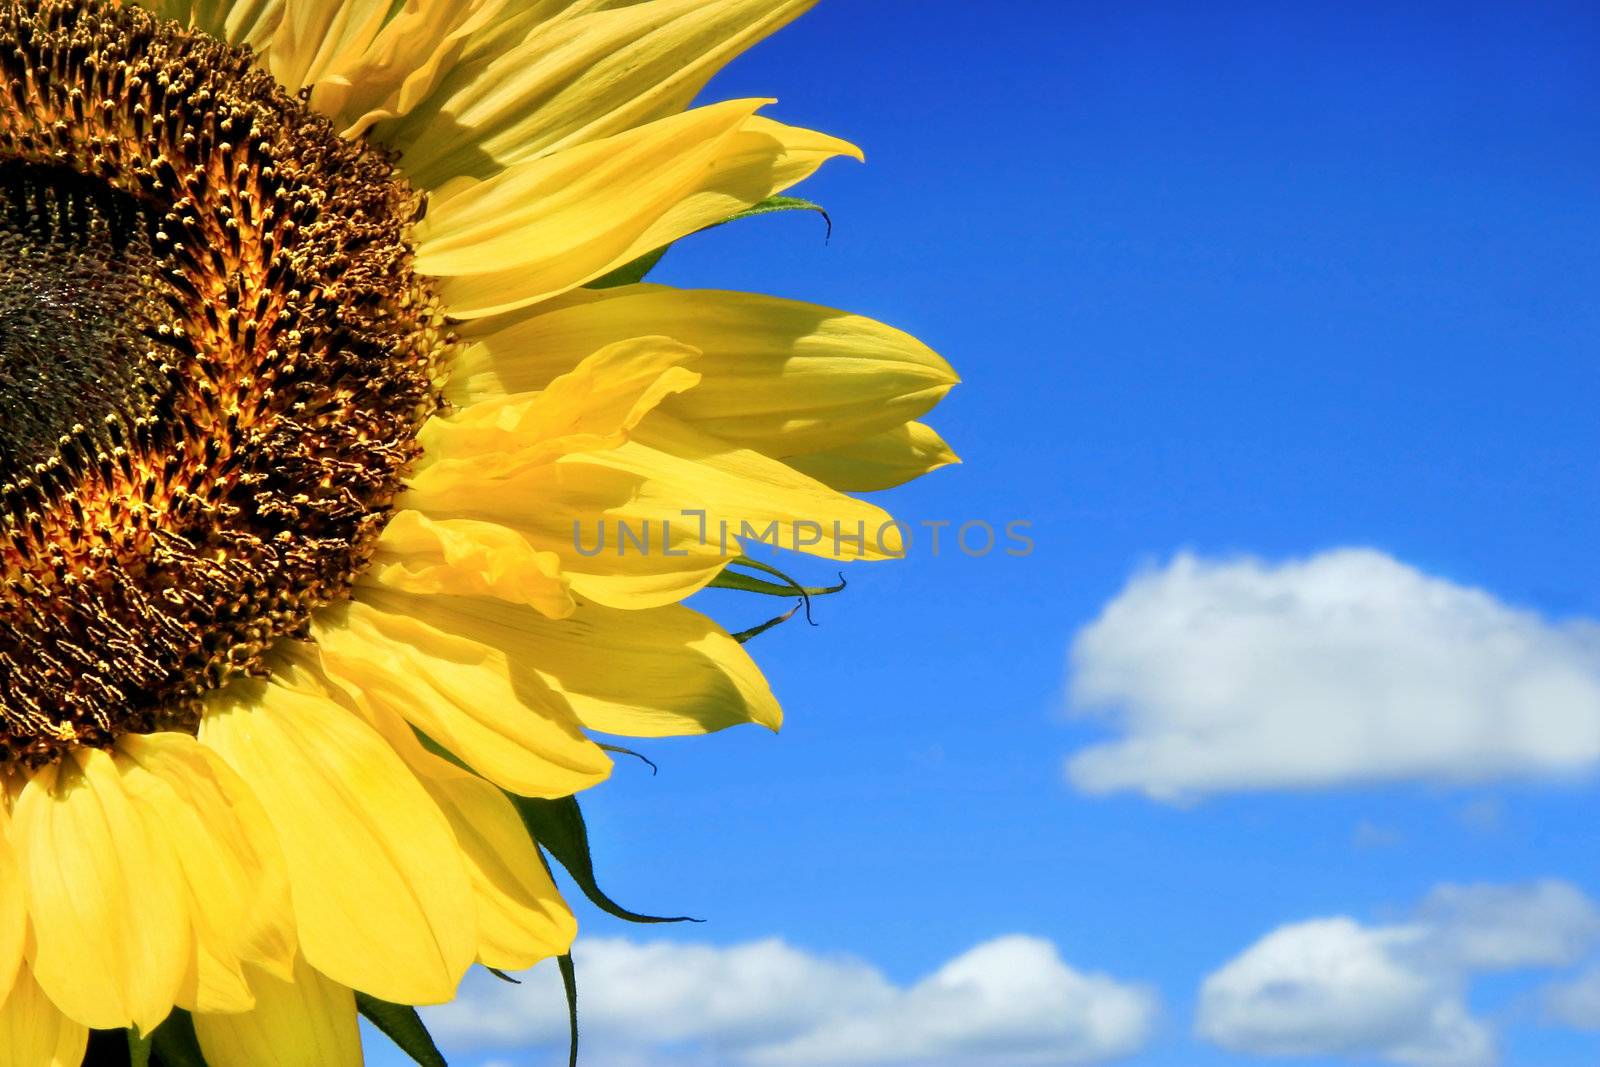 Sunflower and clouds against a blue sky